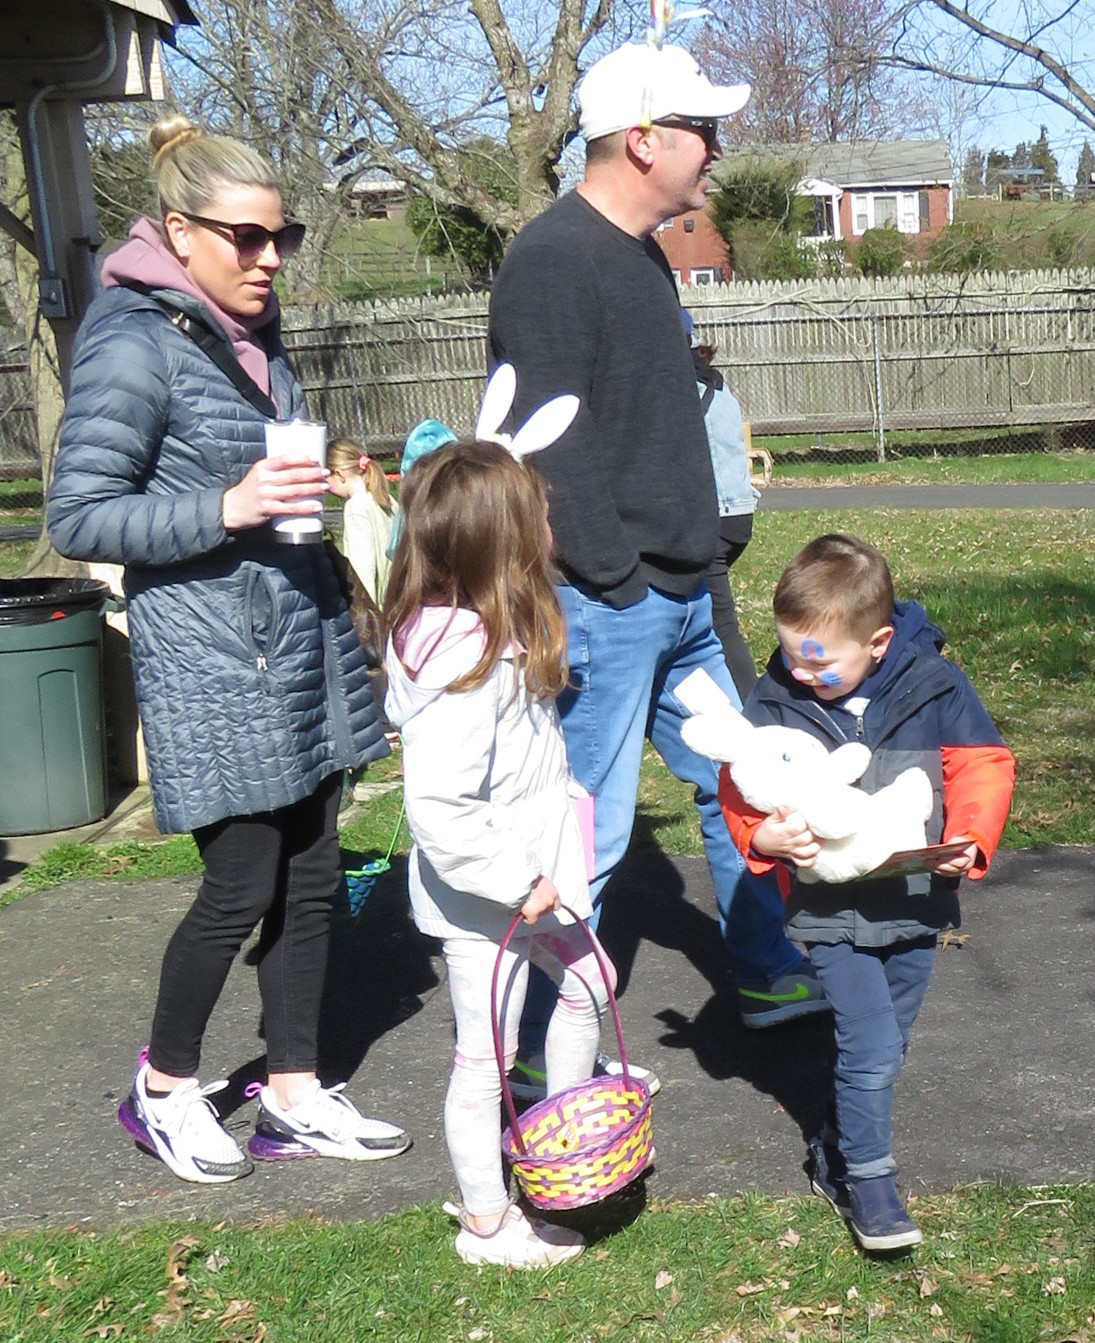 Lower Frederick Easter Hunt Draws Biggest Crowd Yet